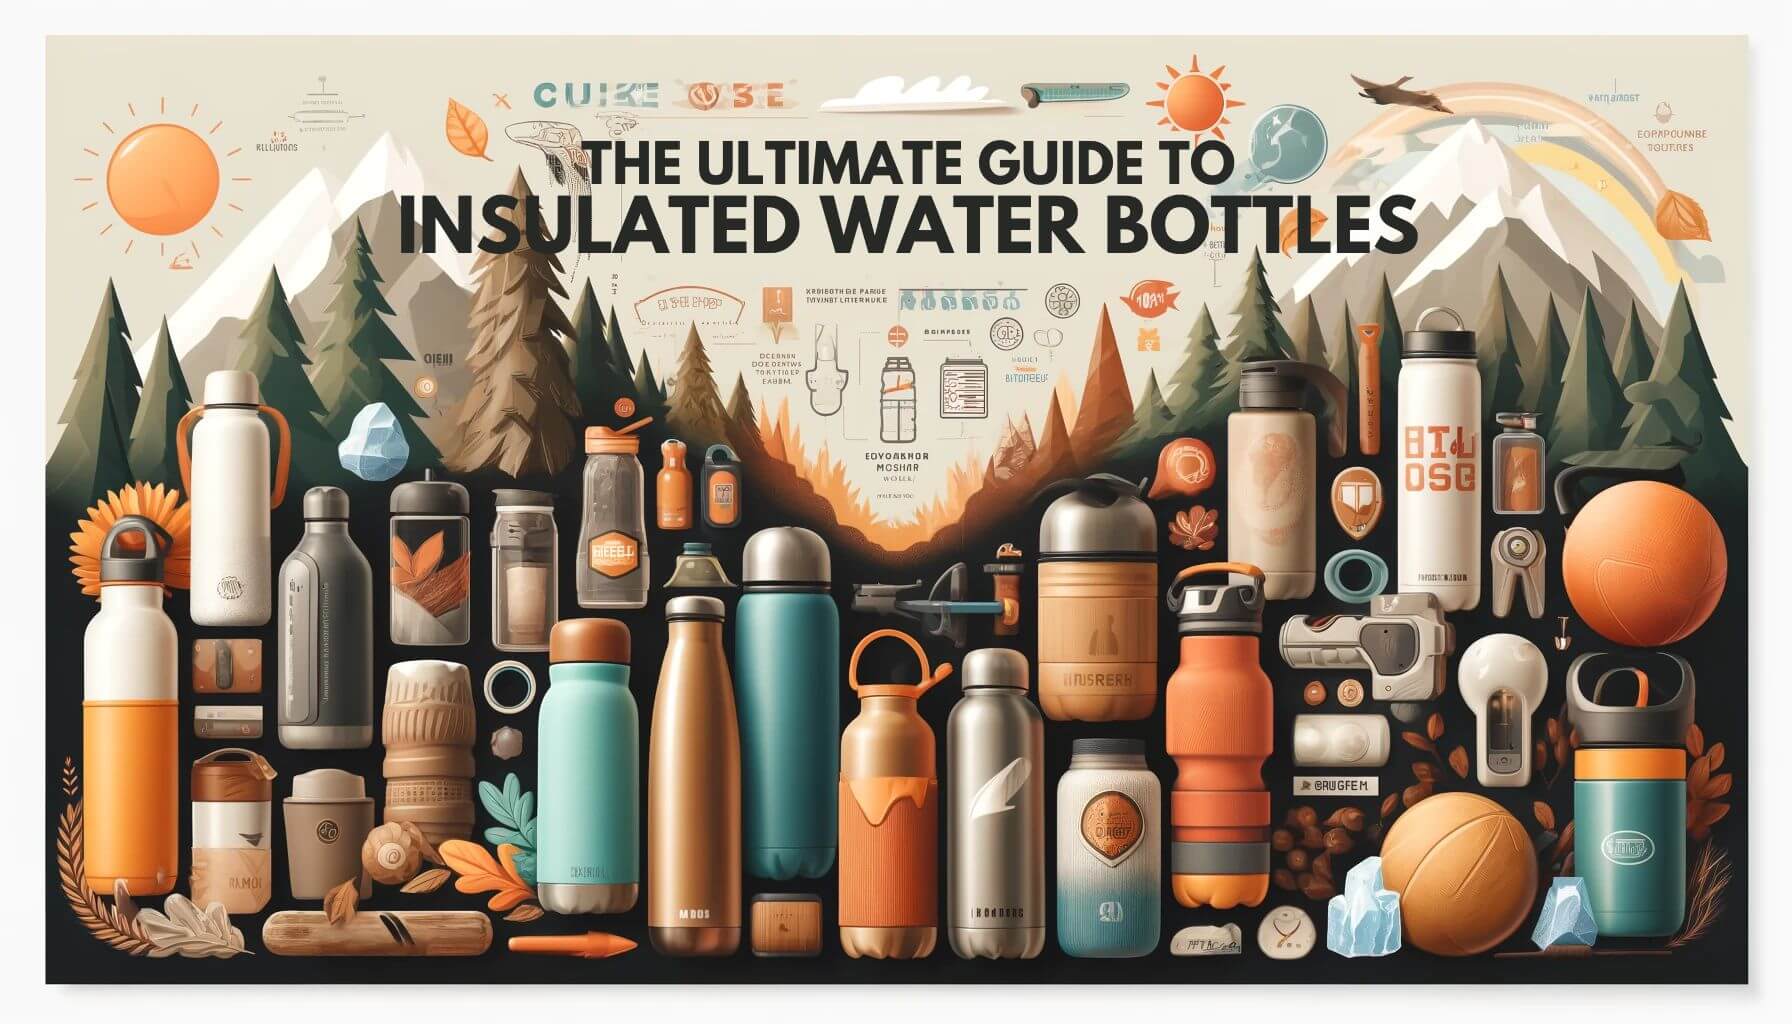 The Ultimate Guide to Insulated Water Bottles